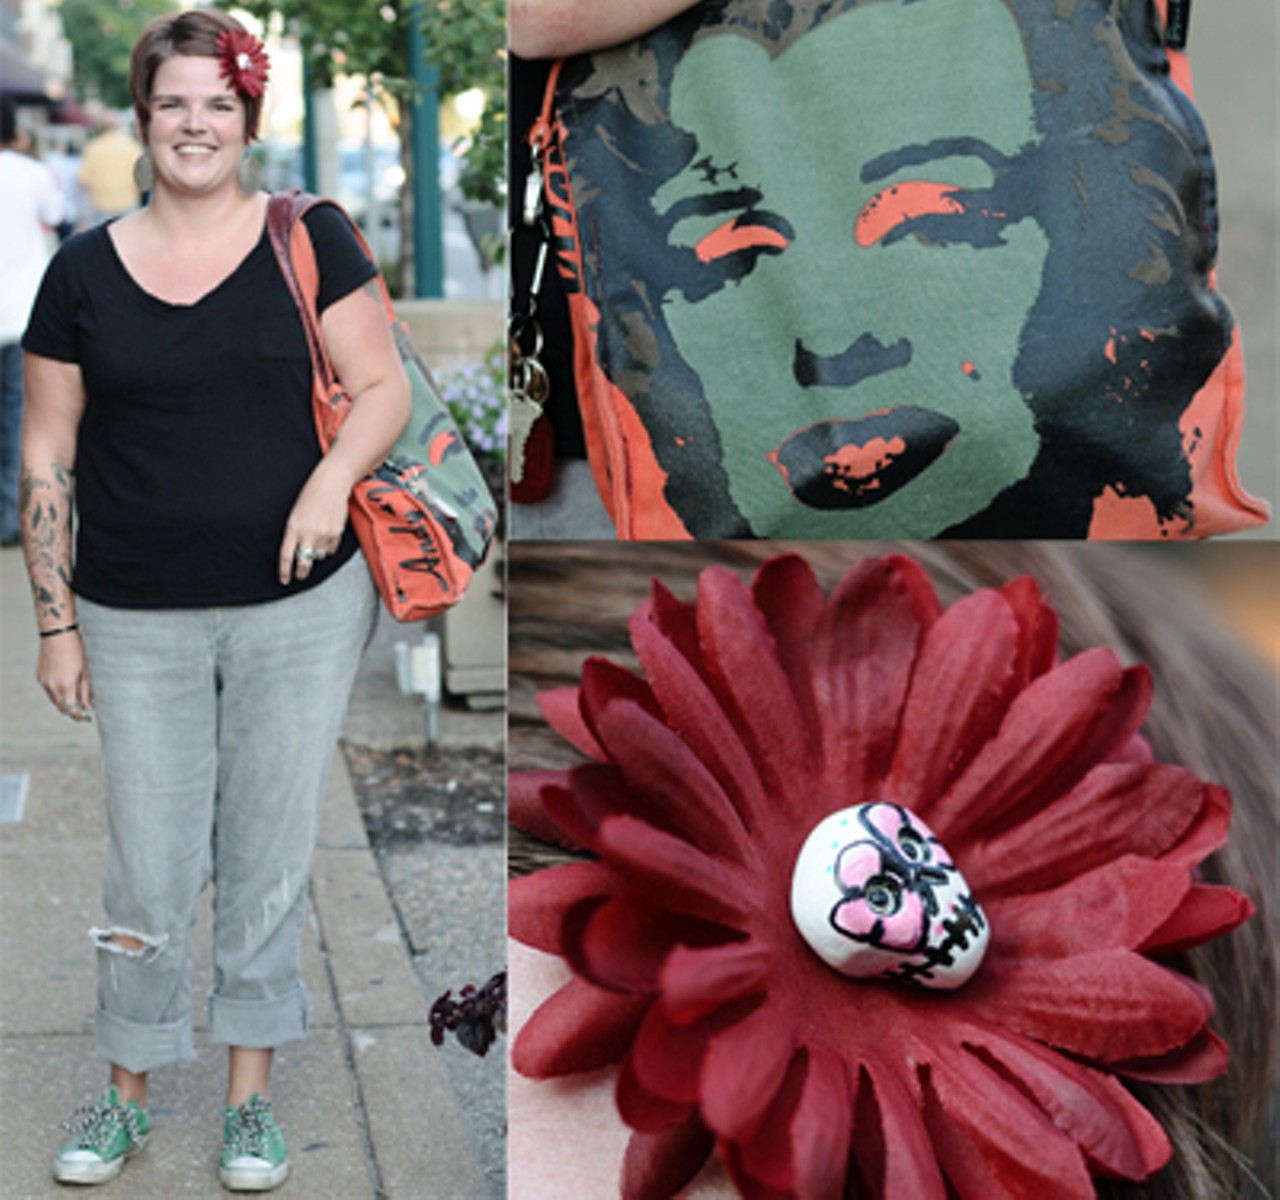 Amanda, 29, Tower Grove Park
Hair Clip: "Day of the Dead" Bobby Pin. Purchased from the Mad Art Gallery show because she wanted a "big hardcore flower." Bag: A thrift store find for $10. Bought because "Andy Warhol is God."
Summer Style: "Be that character." Today's look is I-don't-give-a-shit day....but still cute.